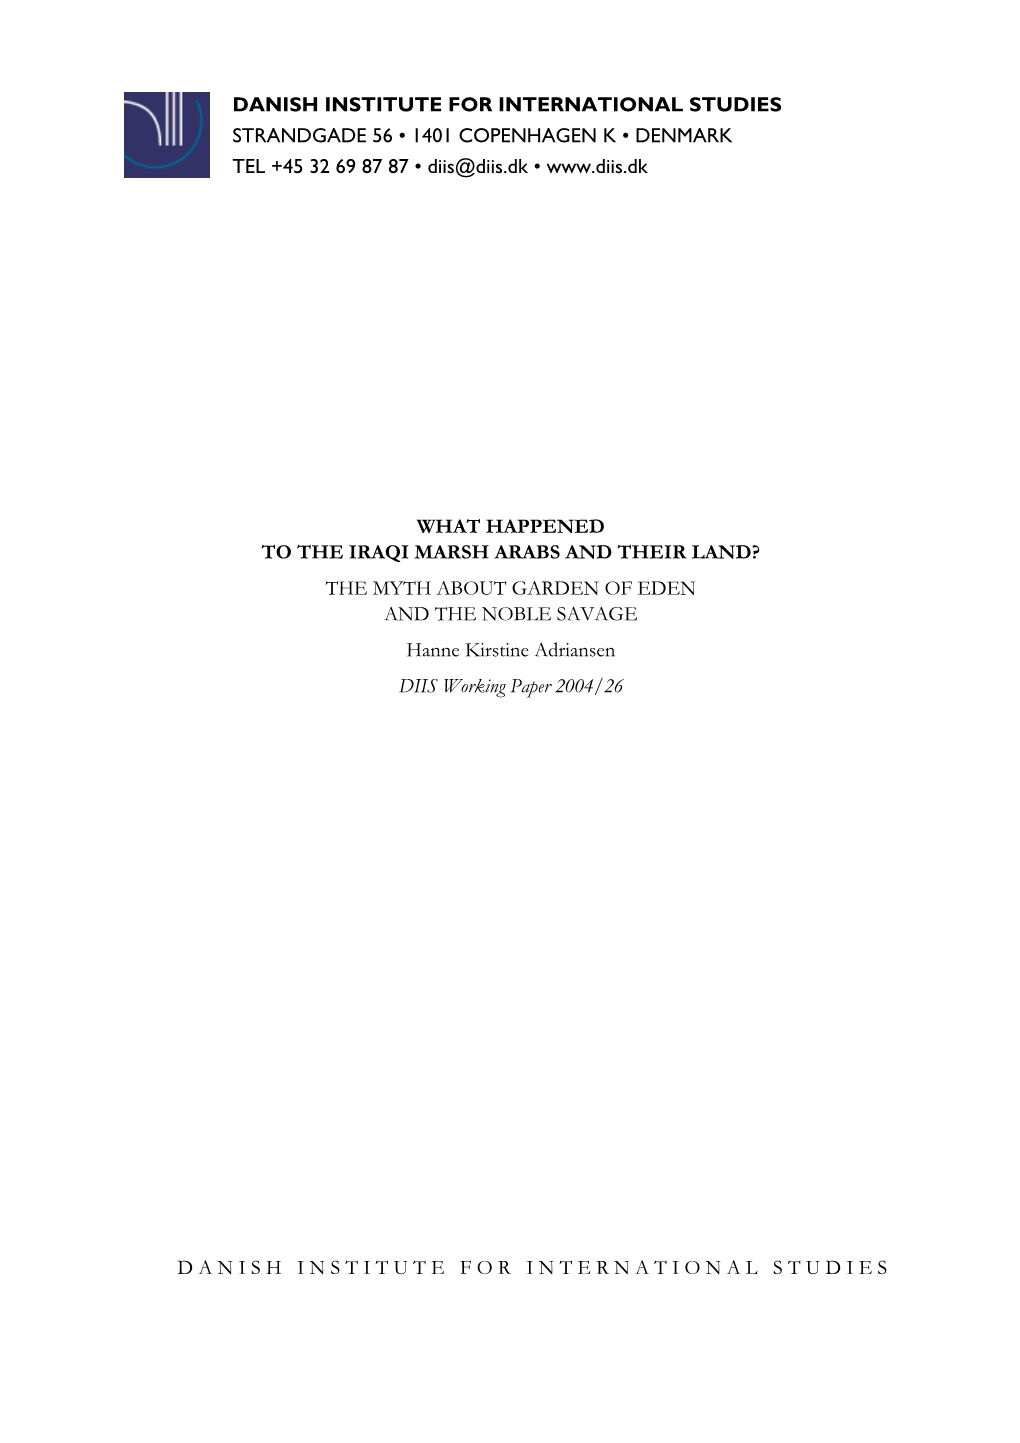 WHAT HAPPENED to the IRAQI MARSH ARABS and THEIR LAND? the MYTH ABOUT GARDEN of EDEN and the NOBLE SAVAGE Hanne Kirstine Adriansen DIIS Working Paper 2004/26